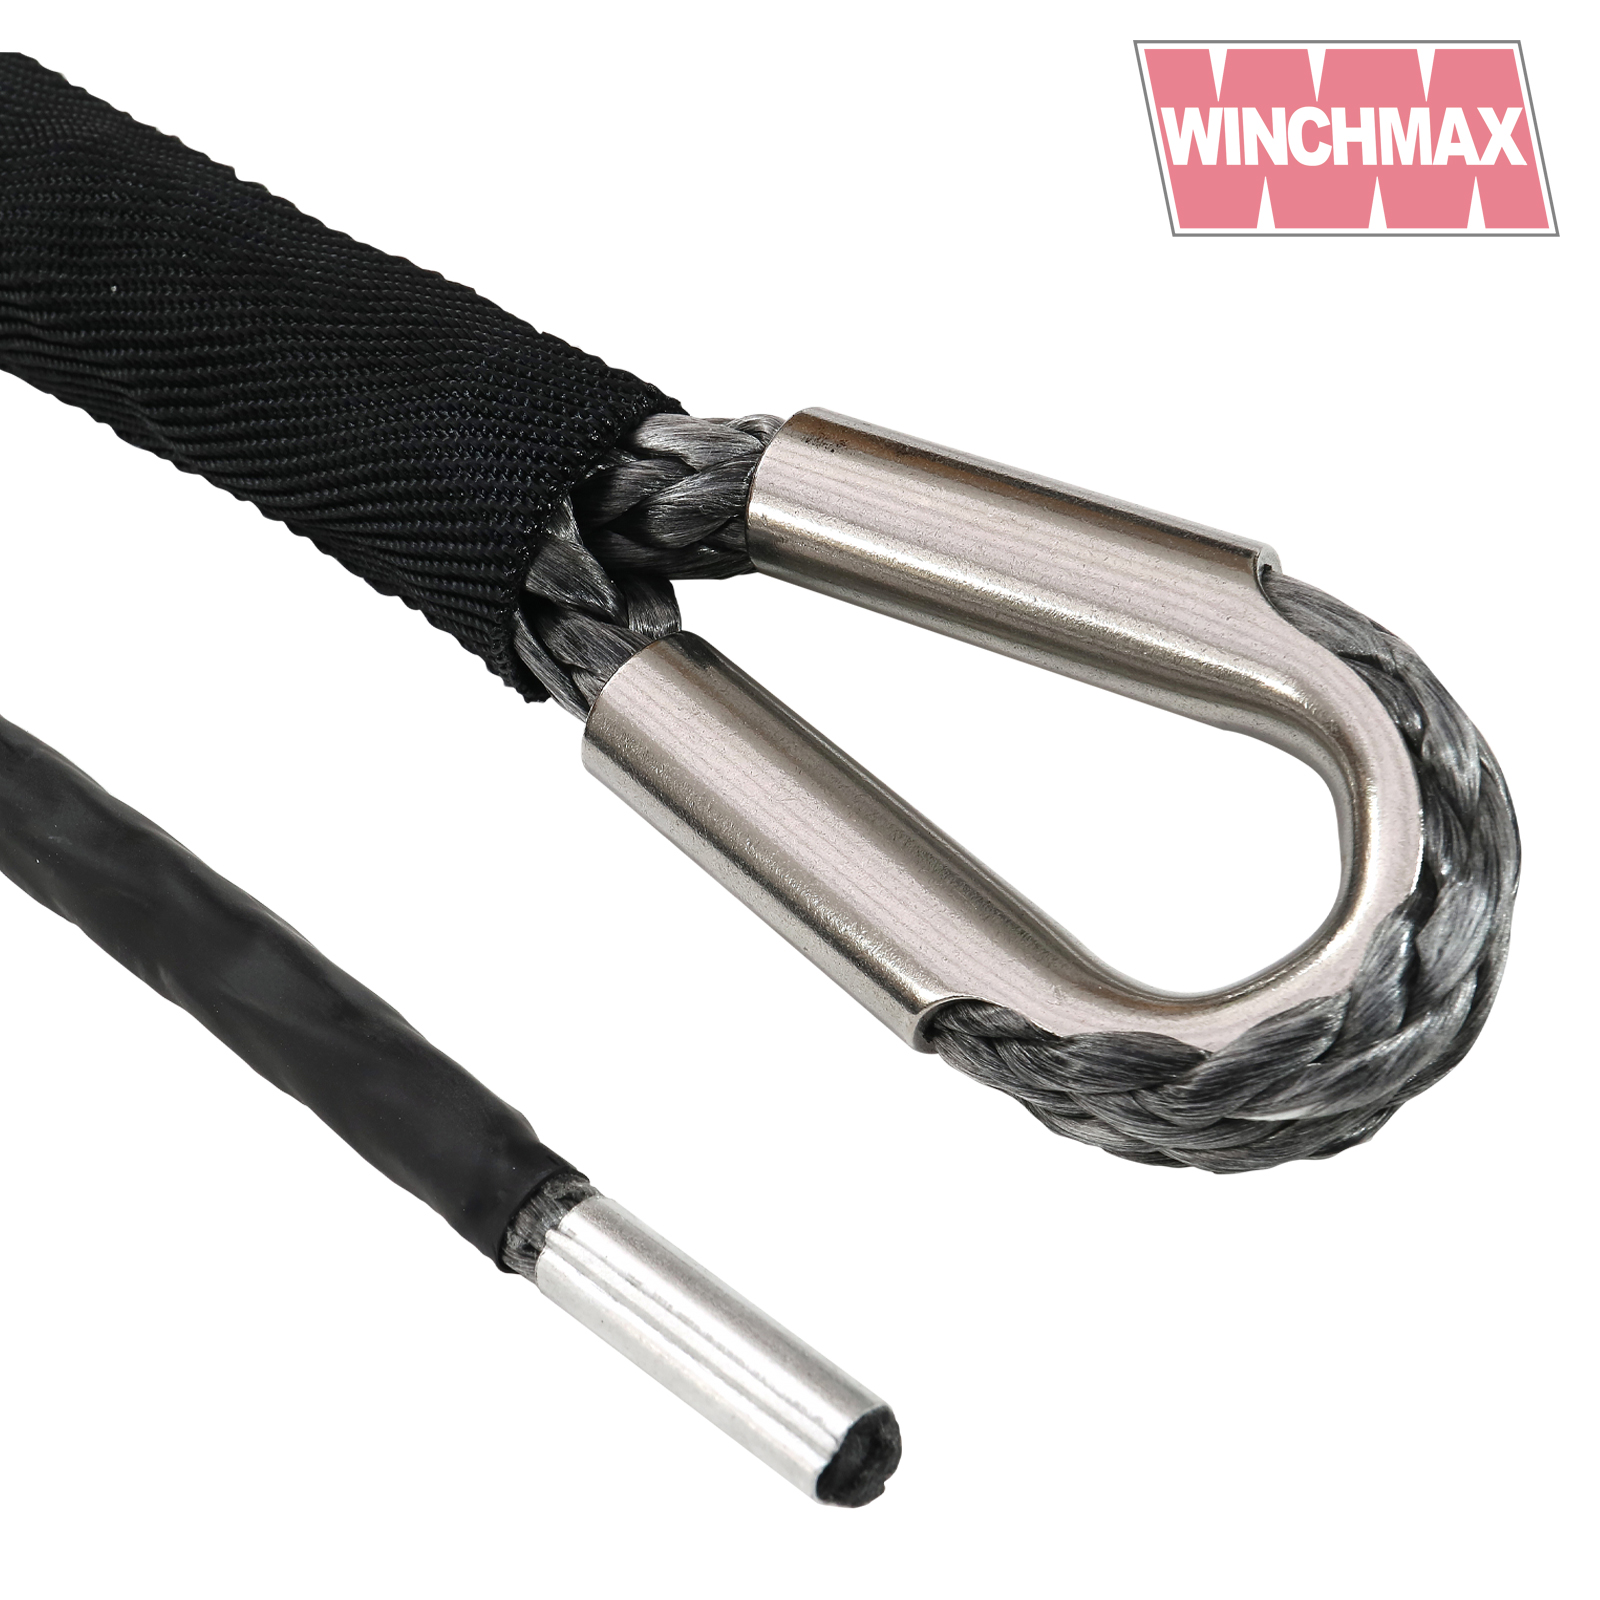 Premium Quality Synthetic Winch Rope 28m x 11mm, Hole Fix. 3/8